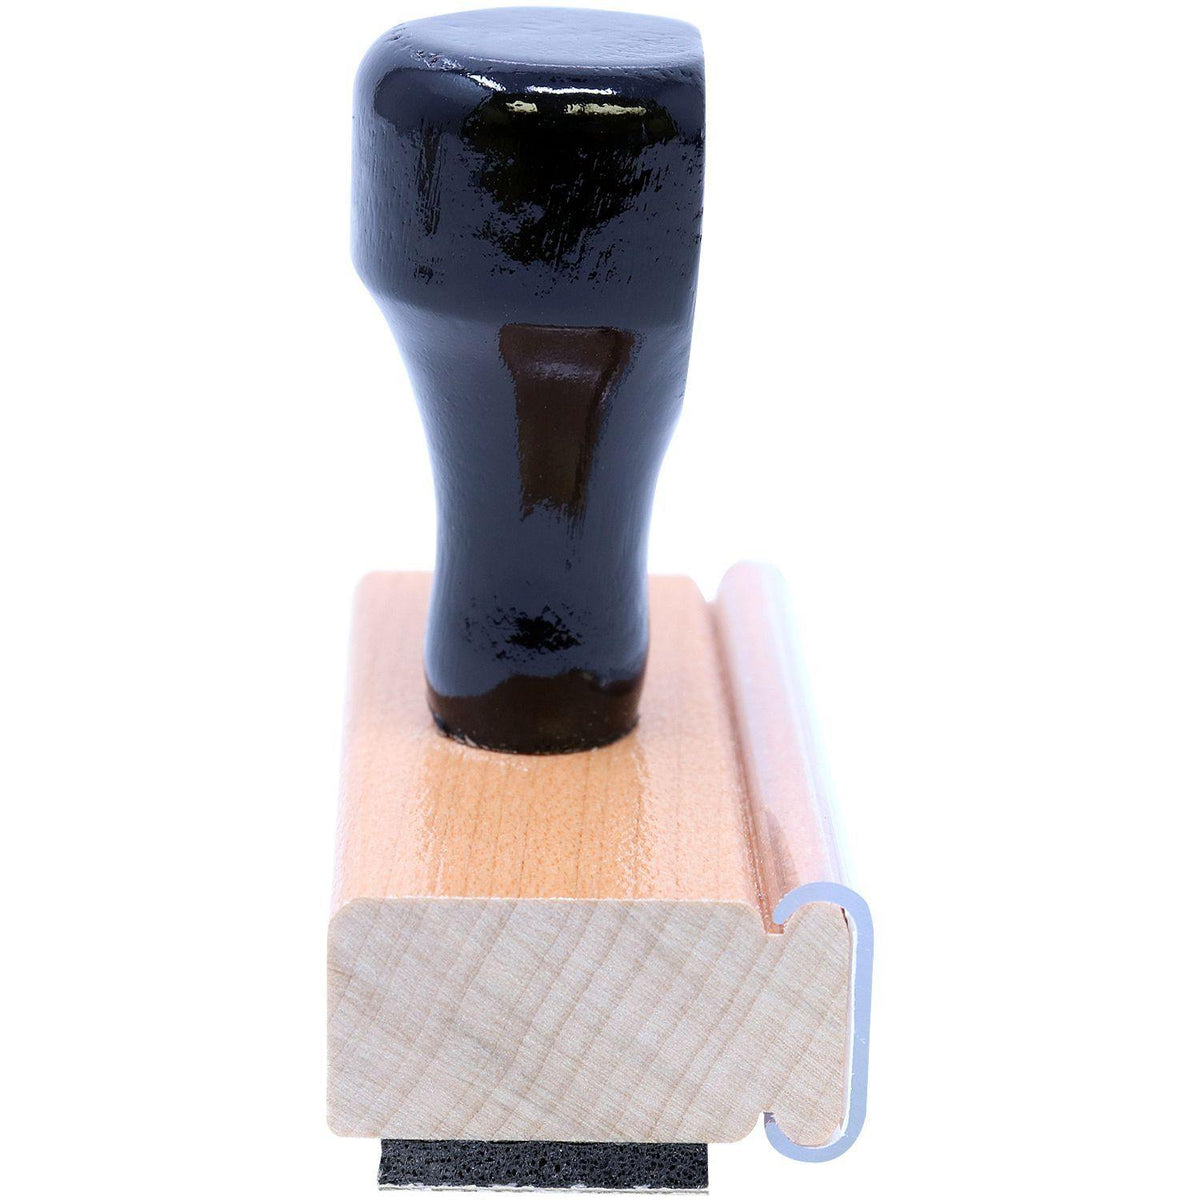 Secure Rubber Stamp - Engineer Seal Stamps - Brand_Acorn, Impression Size_Small, Stamp Type_Regular Stamp, Type of Use_Office